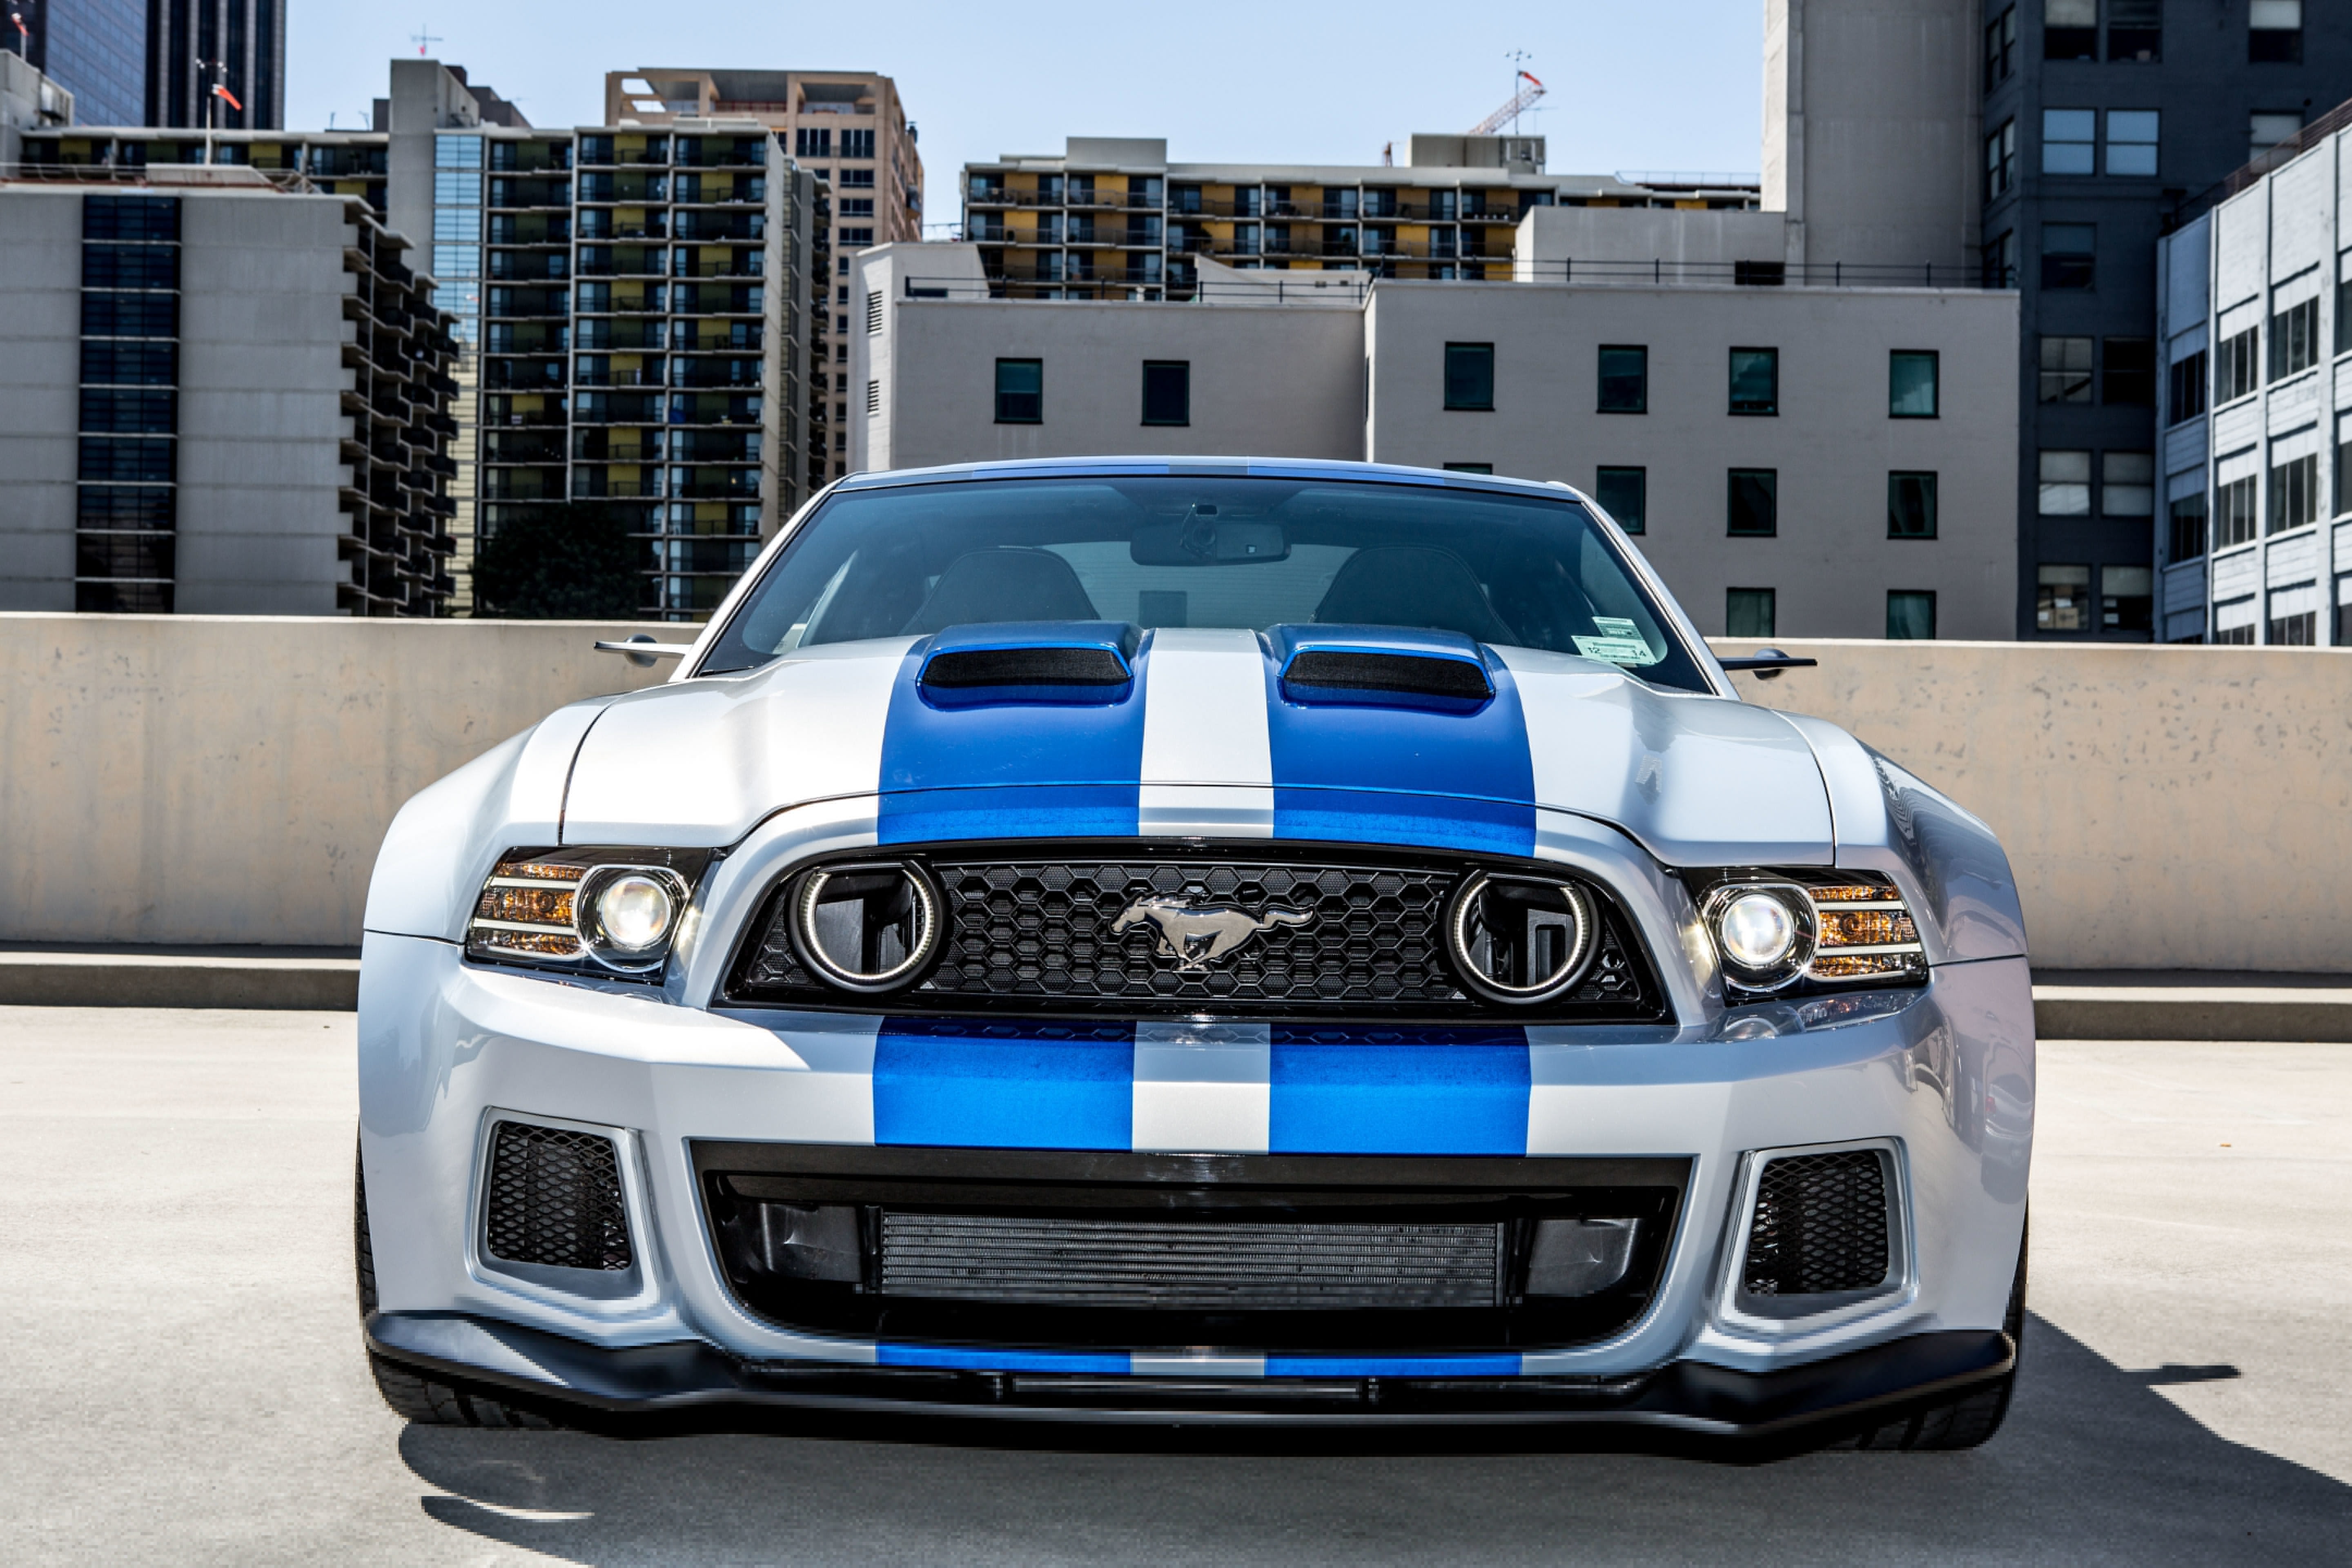 White And Blue Striped Ford Mustang Parked On Gray Concrete Road During Daytime Hd Wallpaper Wallpaper Flare